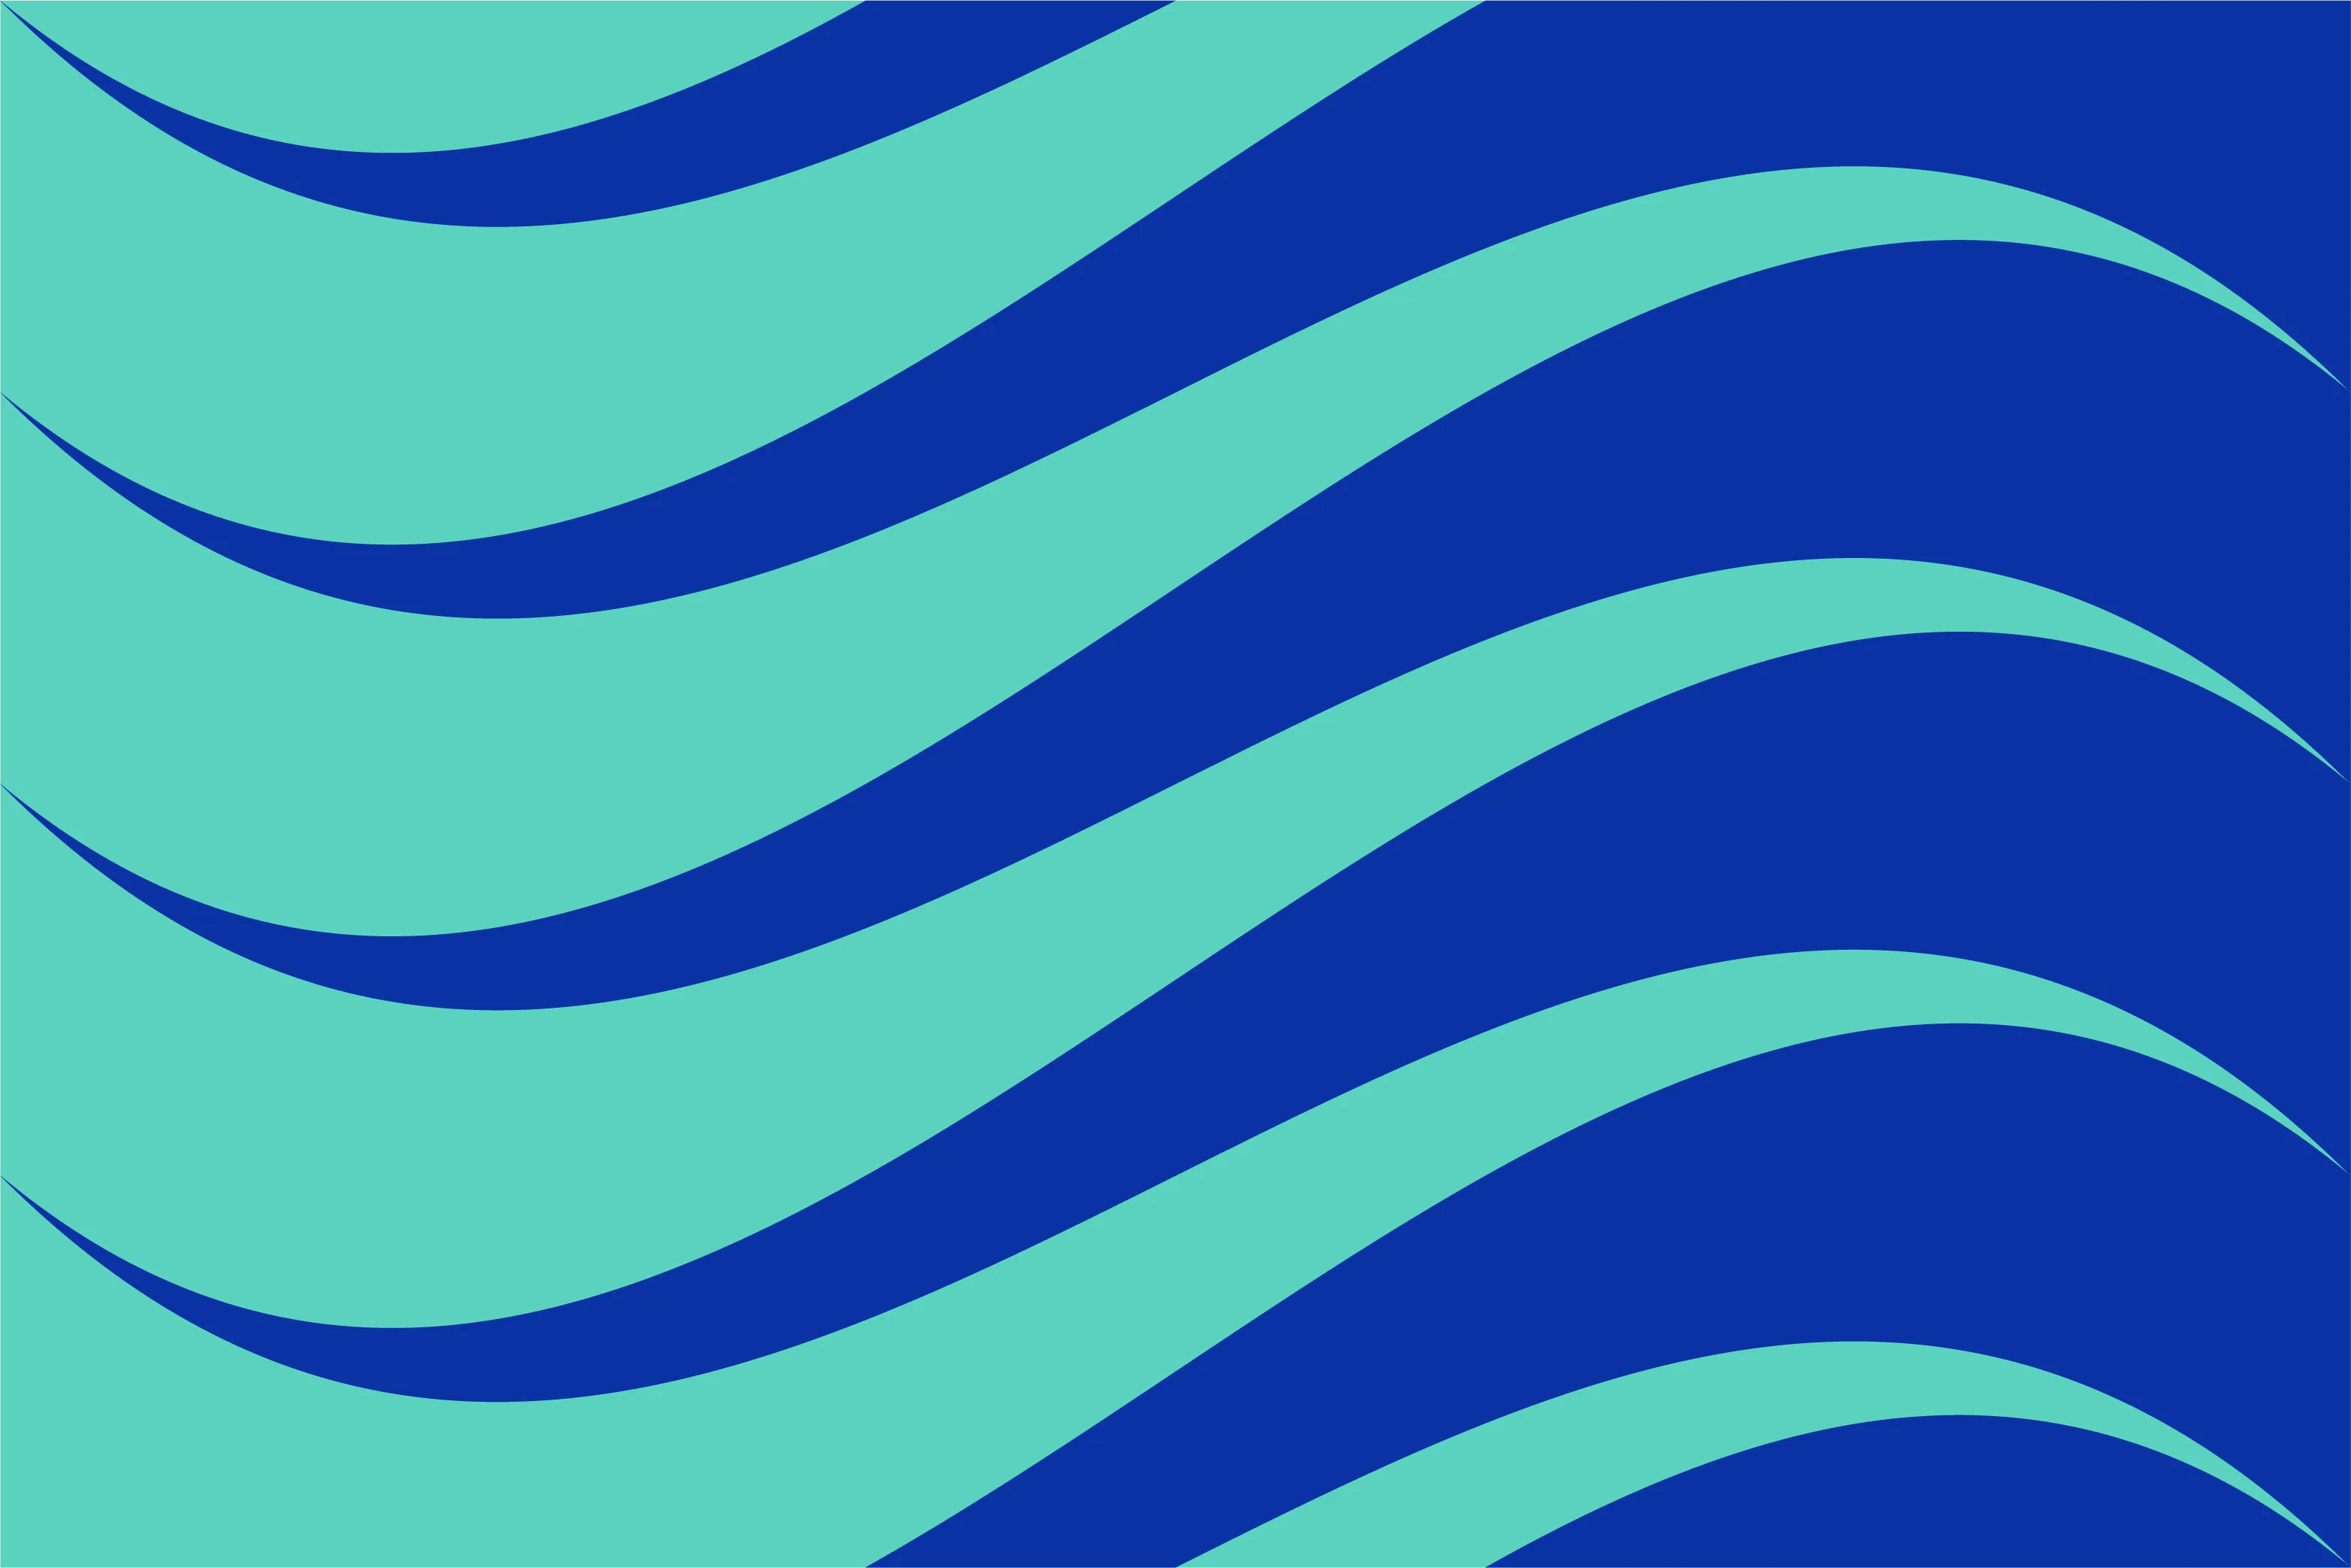 The Stuttering Pride Flag features interlocking sea-green and ultramarine waves, in a symmetrical pattern that is the same when the flag is turned upside down. The waves get cropped out of frame, signifying a never-ending ocean of stuttering pride.